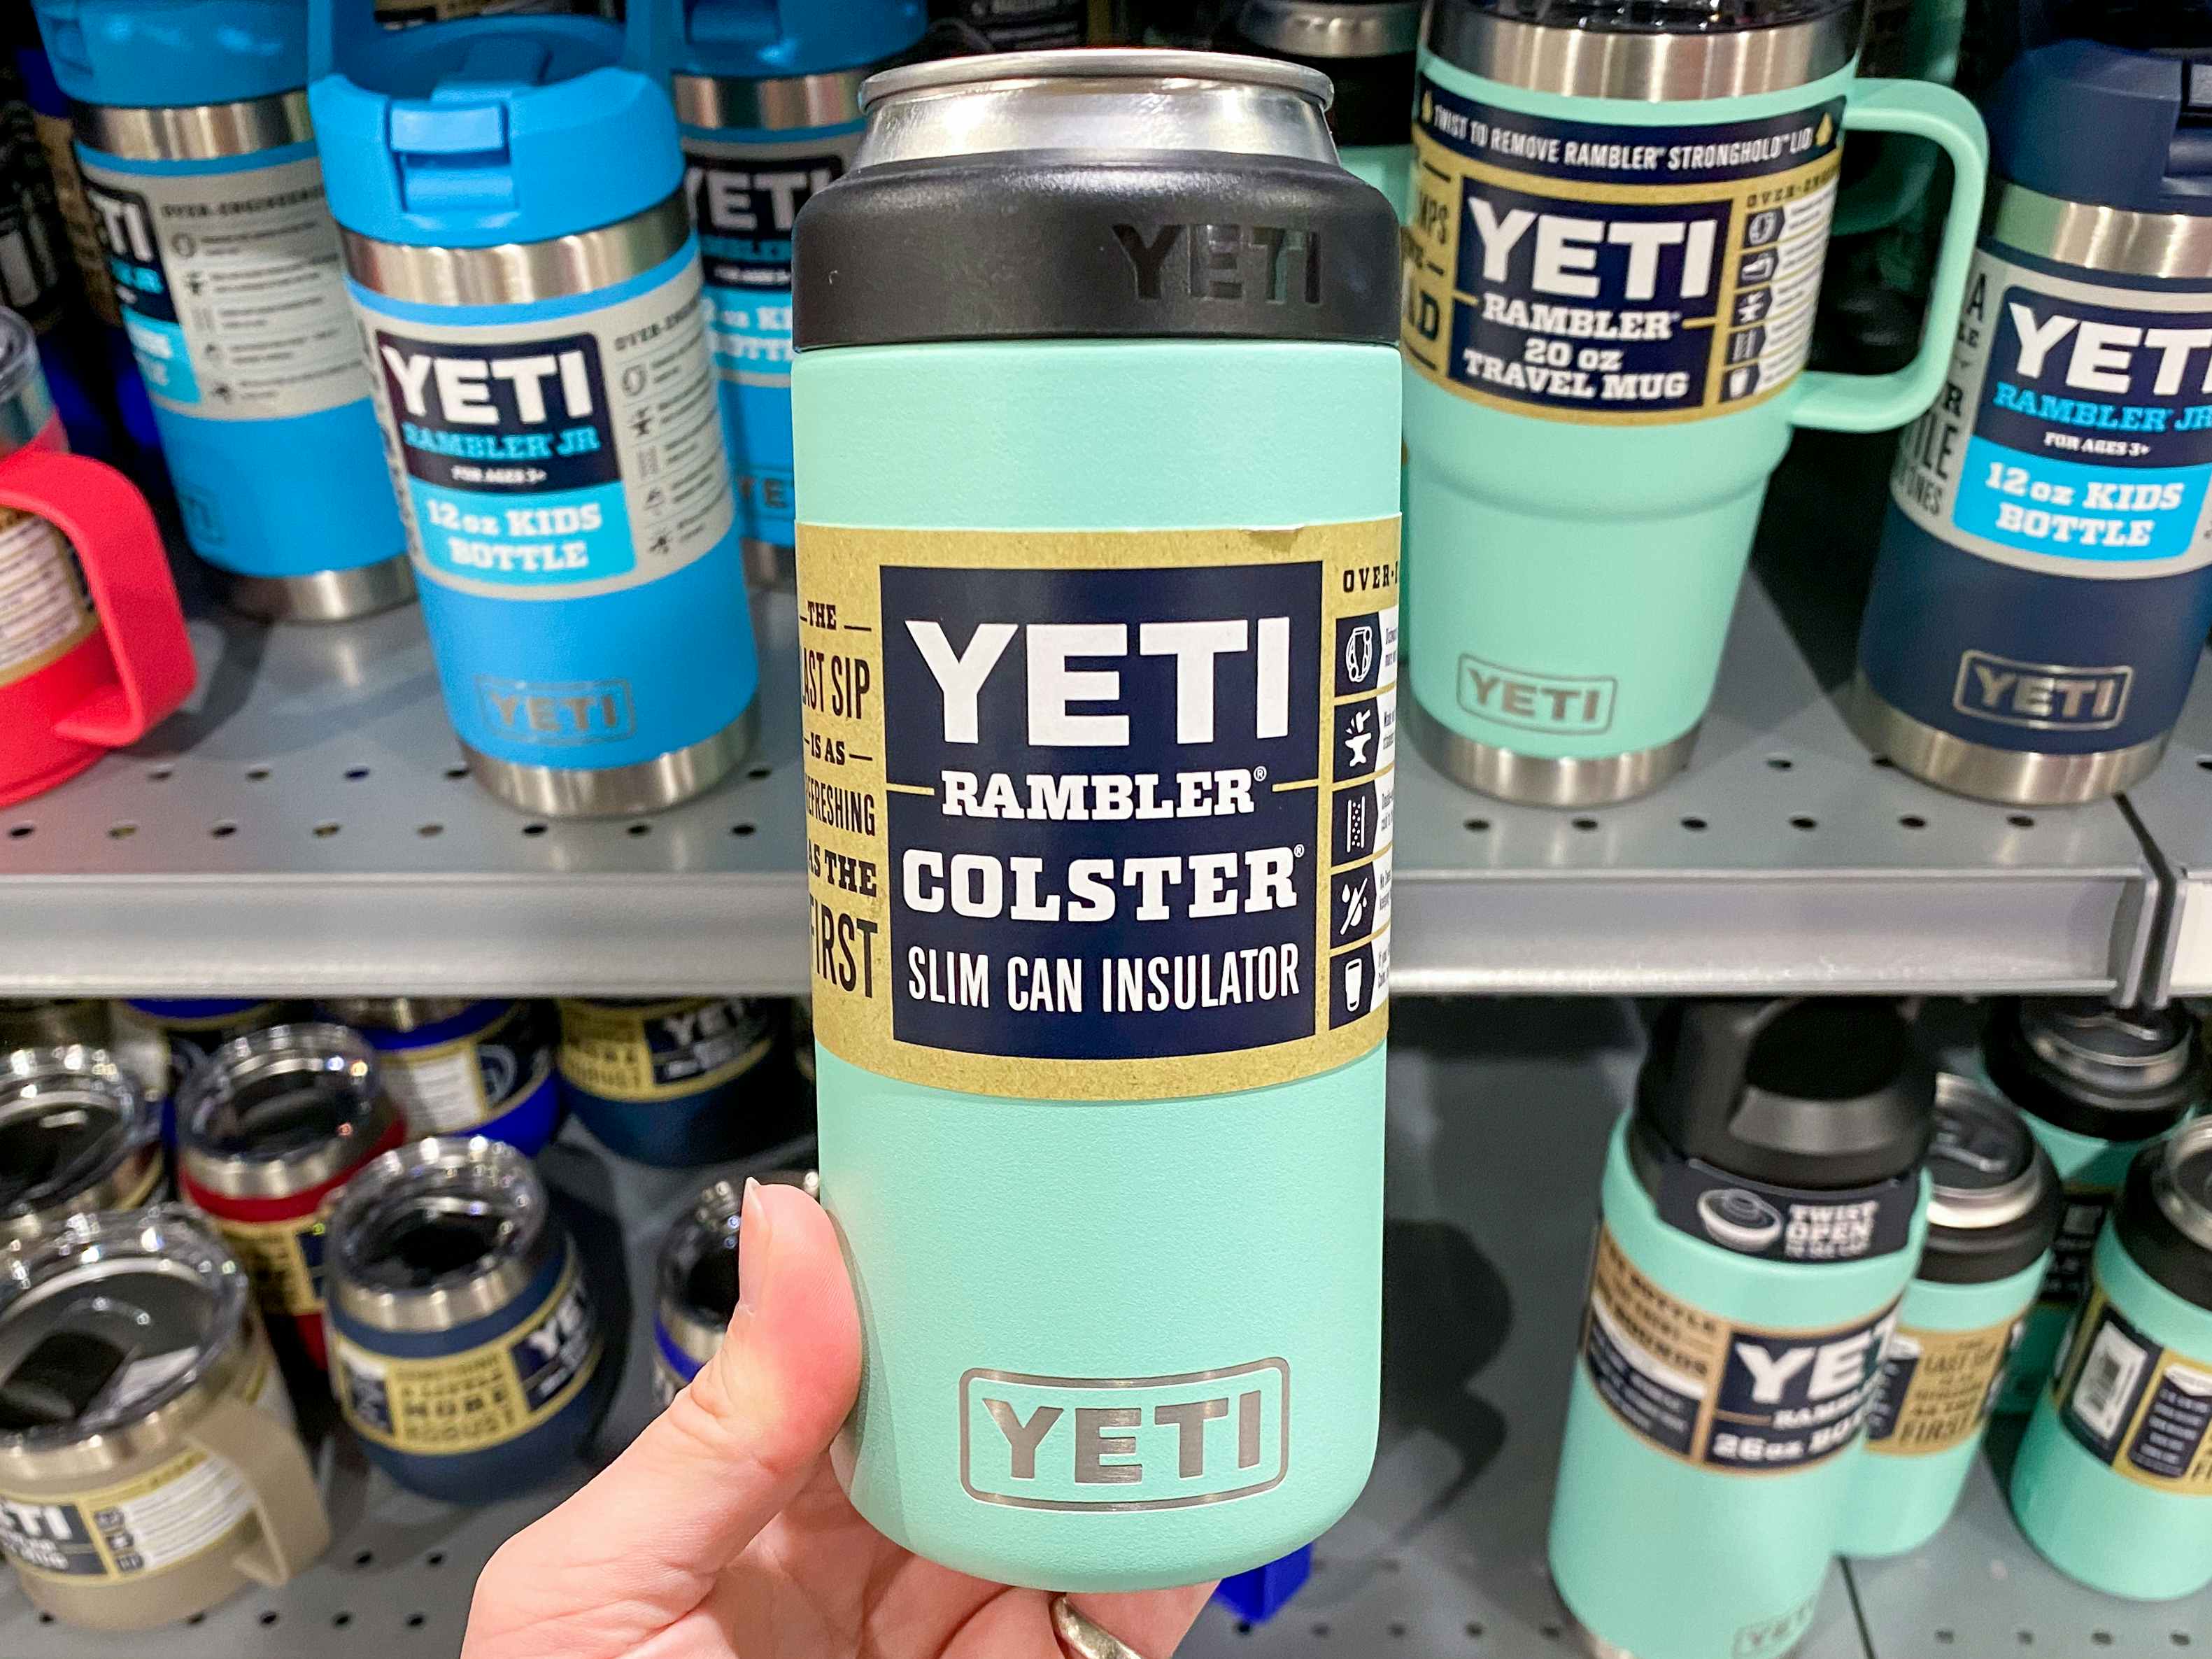 A person's hand holding up a teal Yeti Rambler Colster Slim Can Insulator in front of a shelf of more Yeti products at Dick's Sporting ...